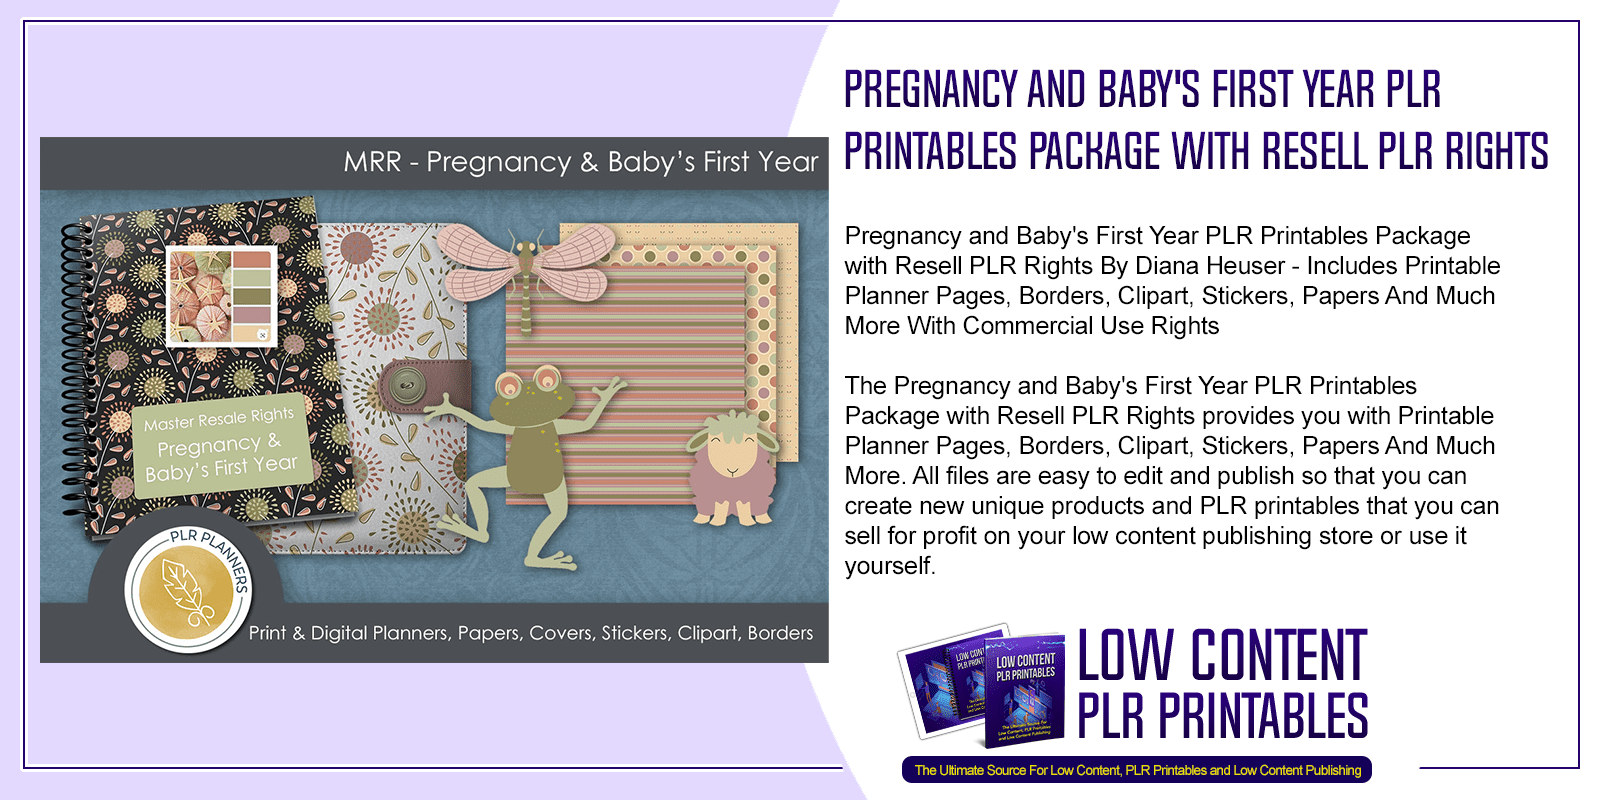 Pregnancy and Babys First Year PLR Printables Package with Resell PLR Rights